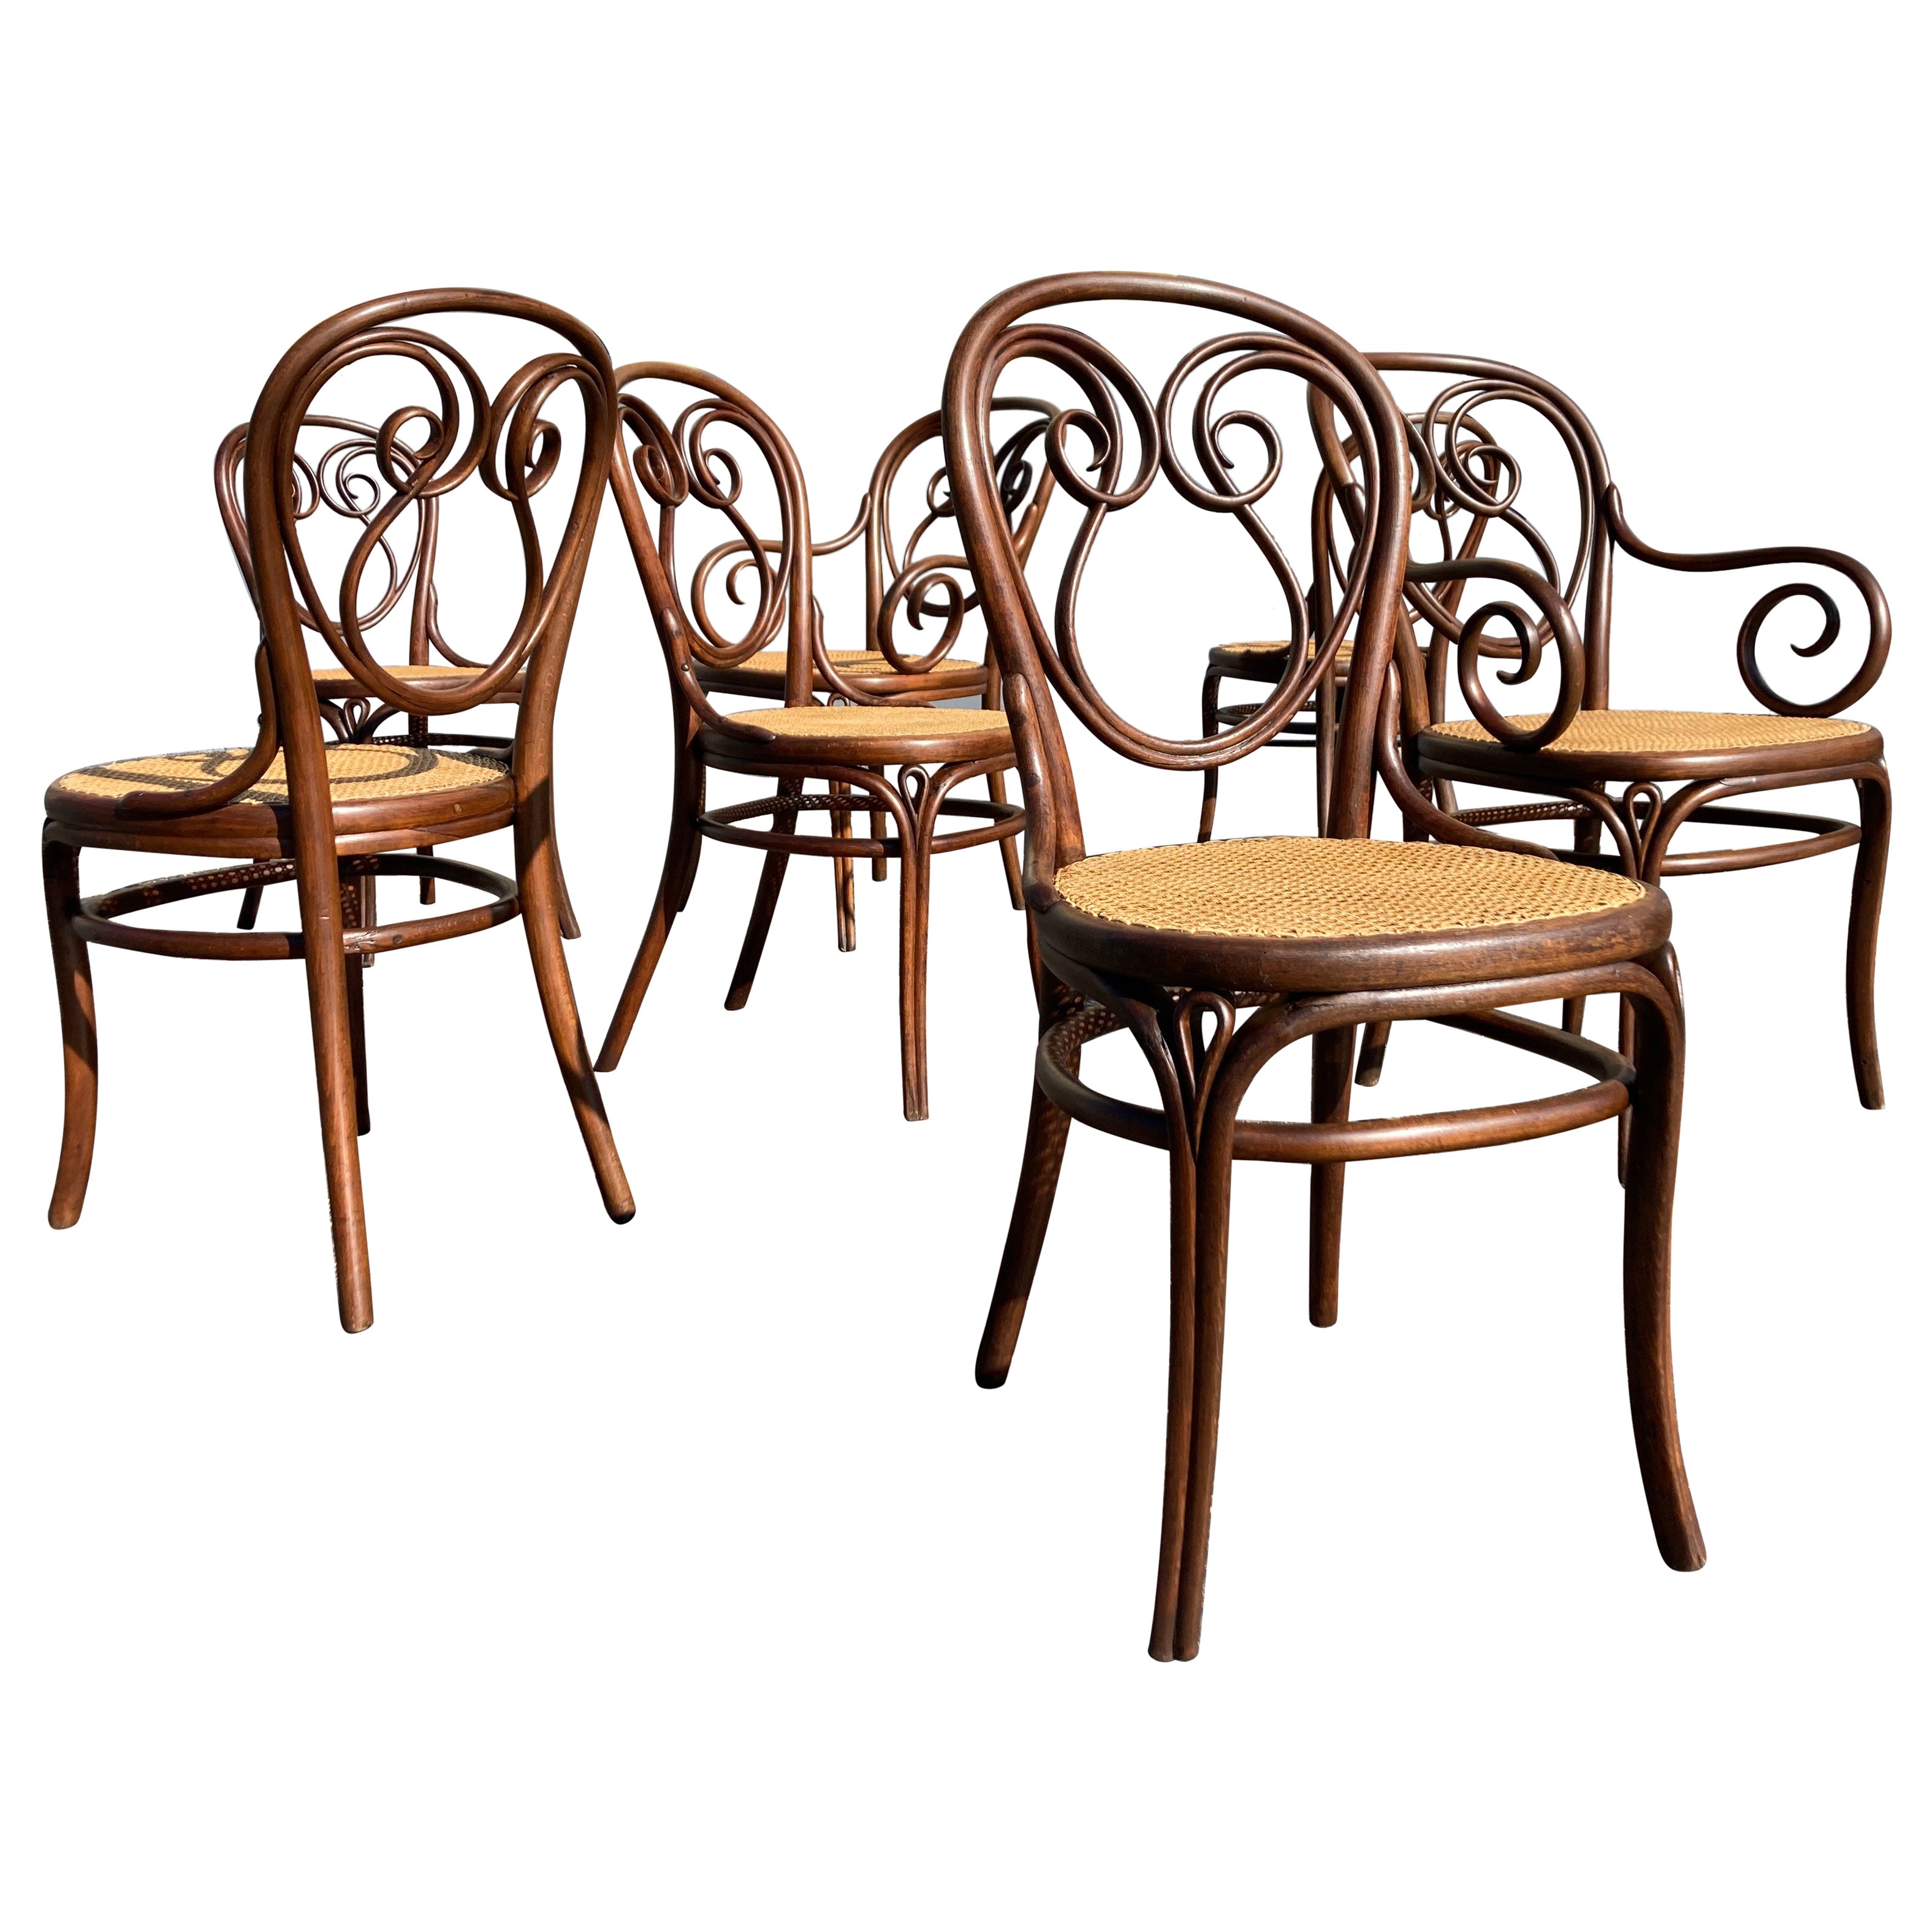 Rare Set of Thonet Chairs Model 13, Bentwood and Cane For Sale